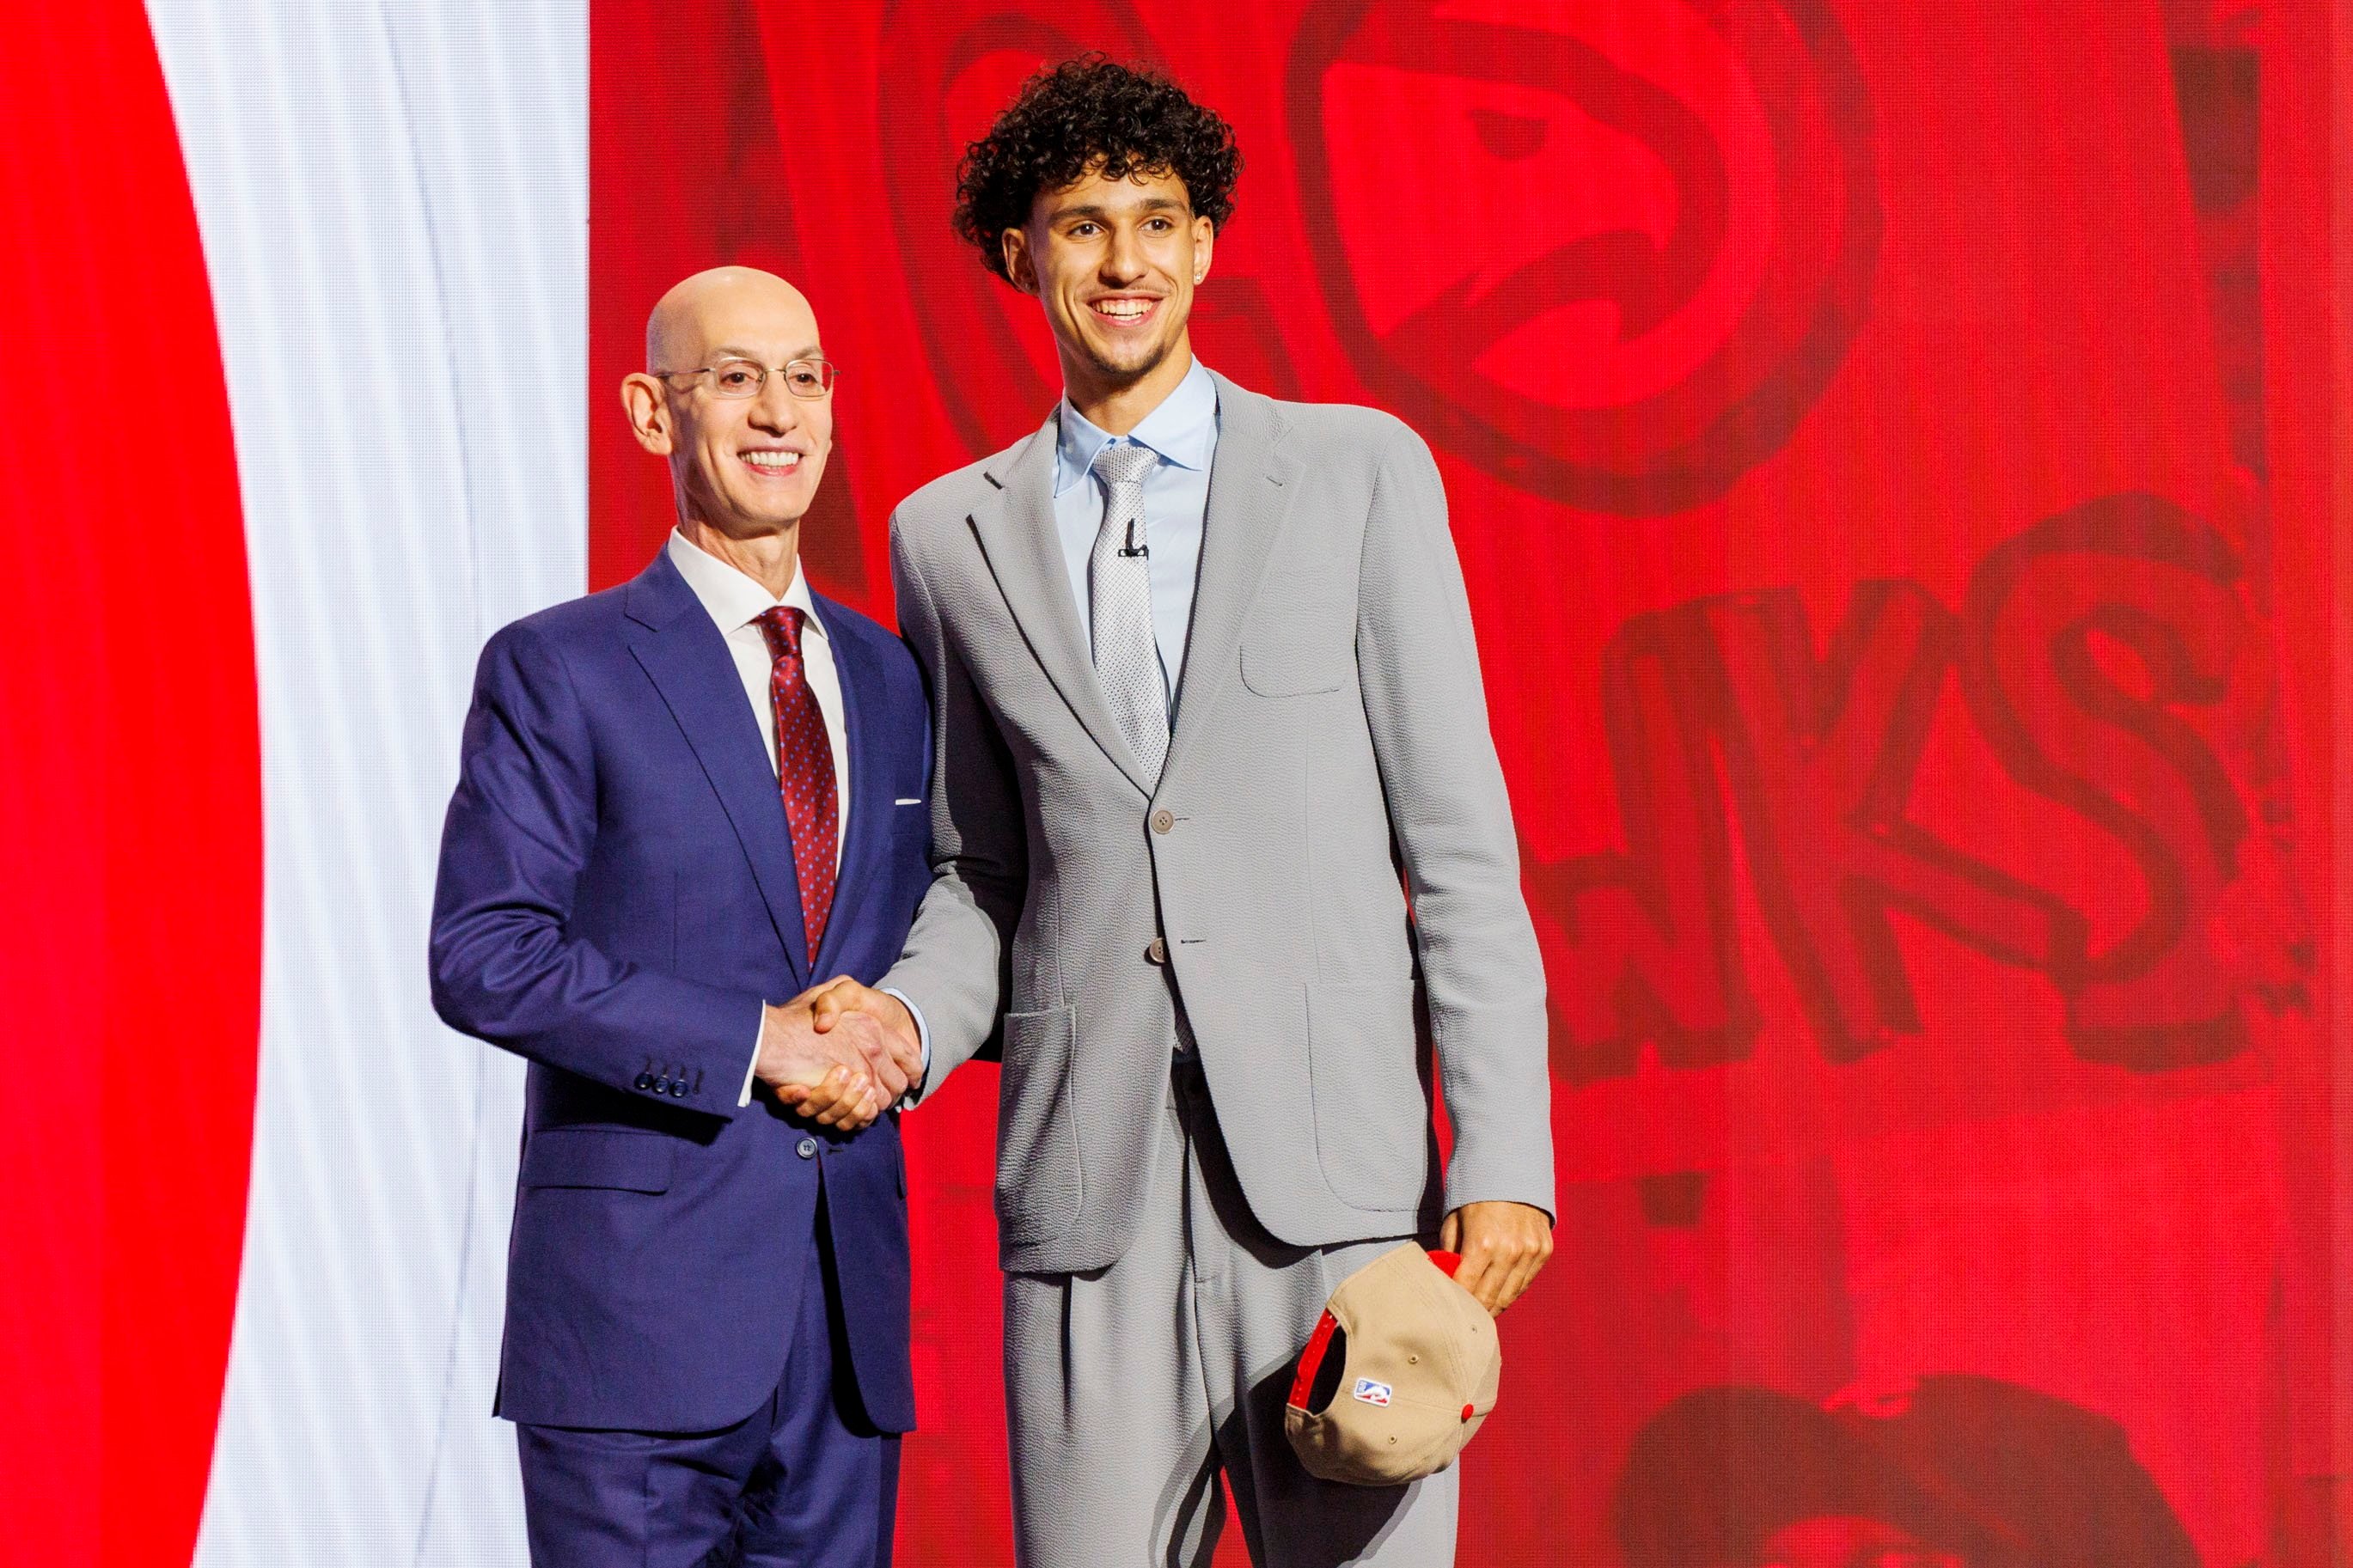 French player and No 1 pick Zaccharie Risacher (right) with NBA commissioner Adam Silver after being drafted by the Atlanta Hawks. Photo: EPA-EFE